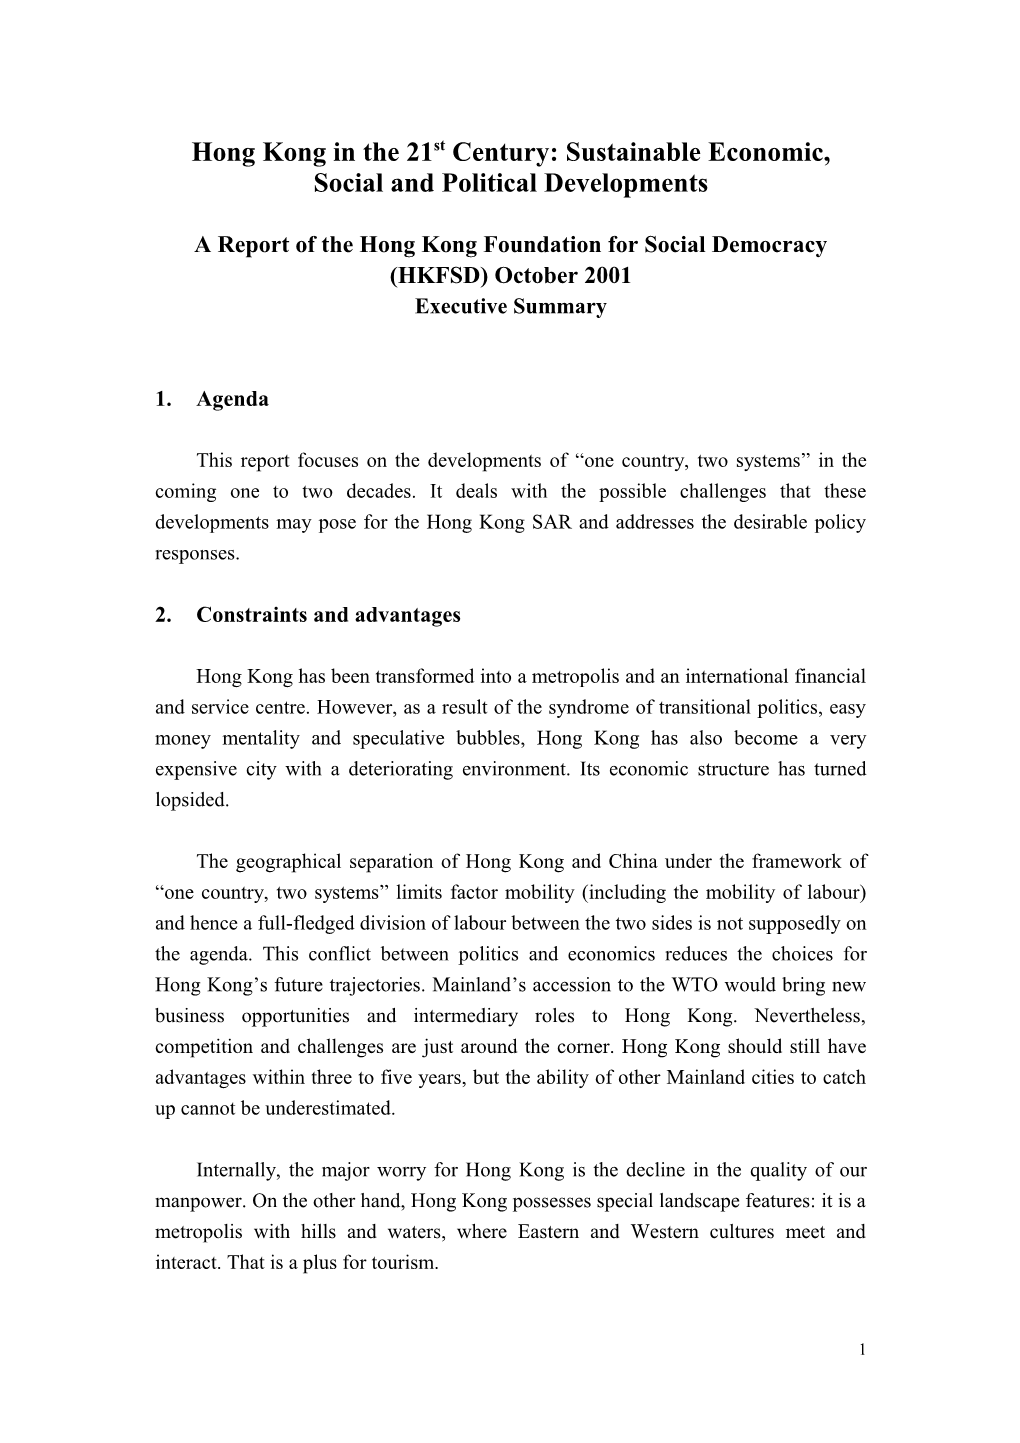 Hong Kong in the 21St Century: Sustainable Economic, Social and Political Developments